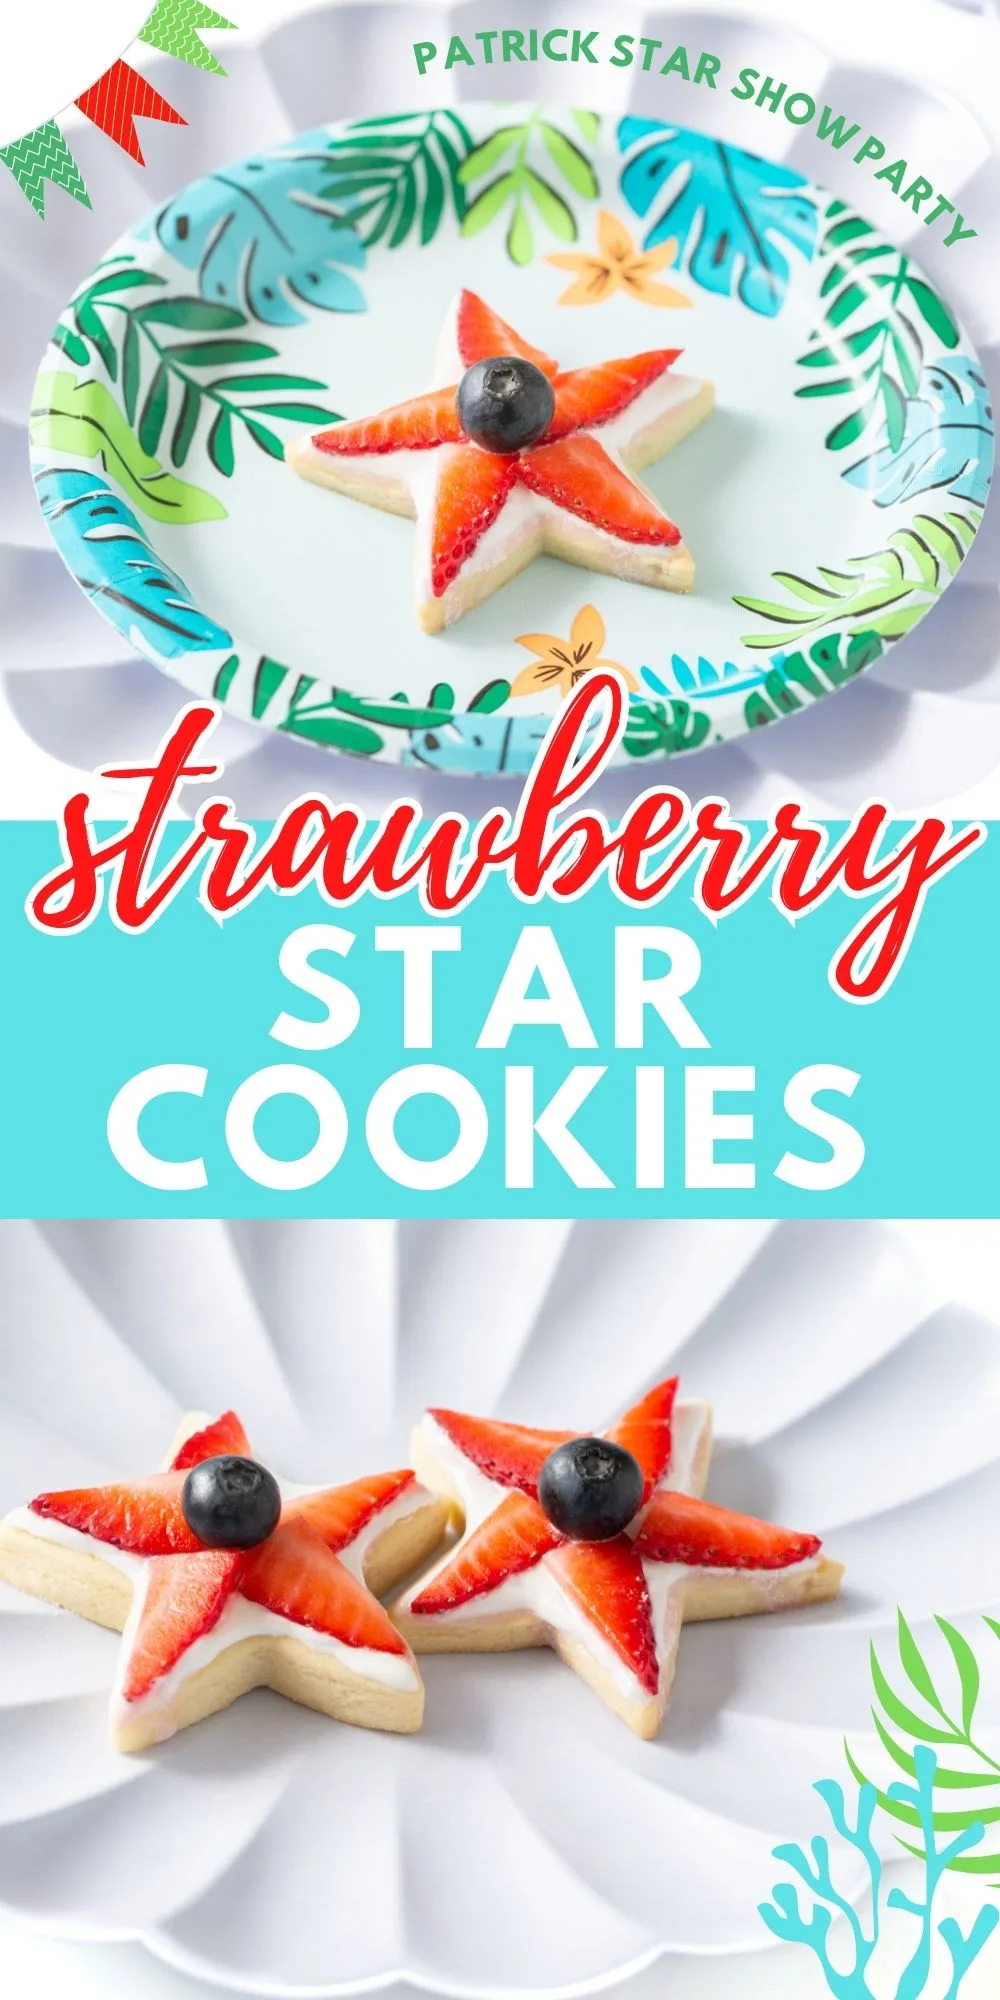 Strawberry star cookies. Perfect red, white and blue cookies.